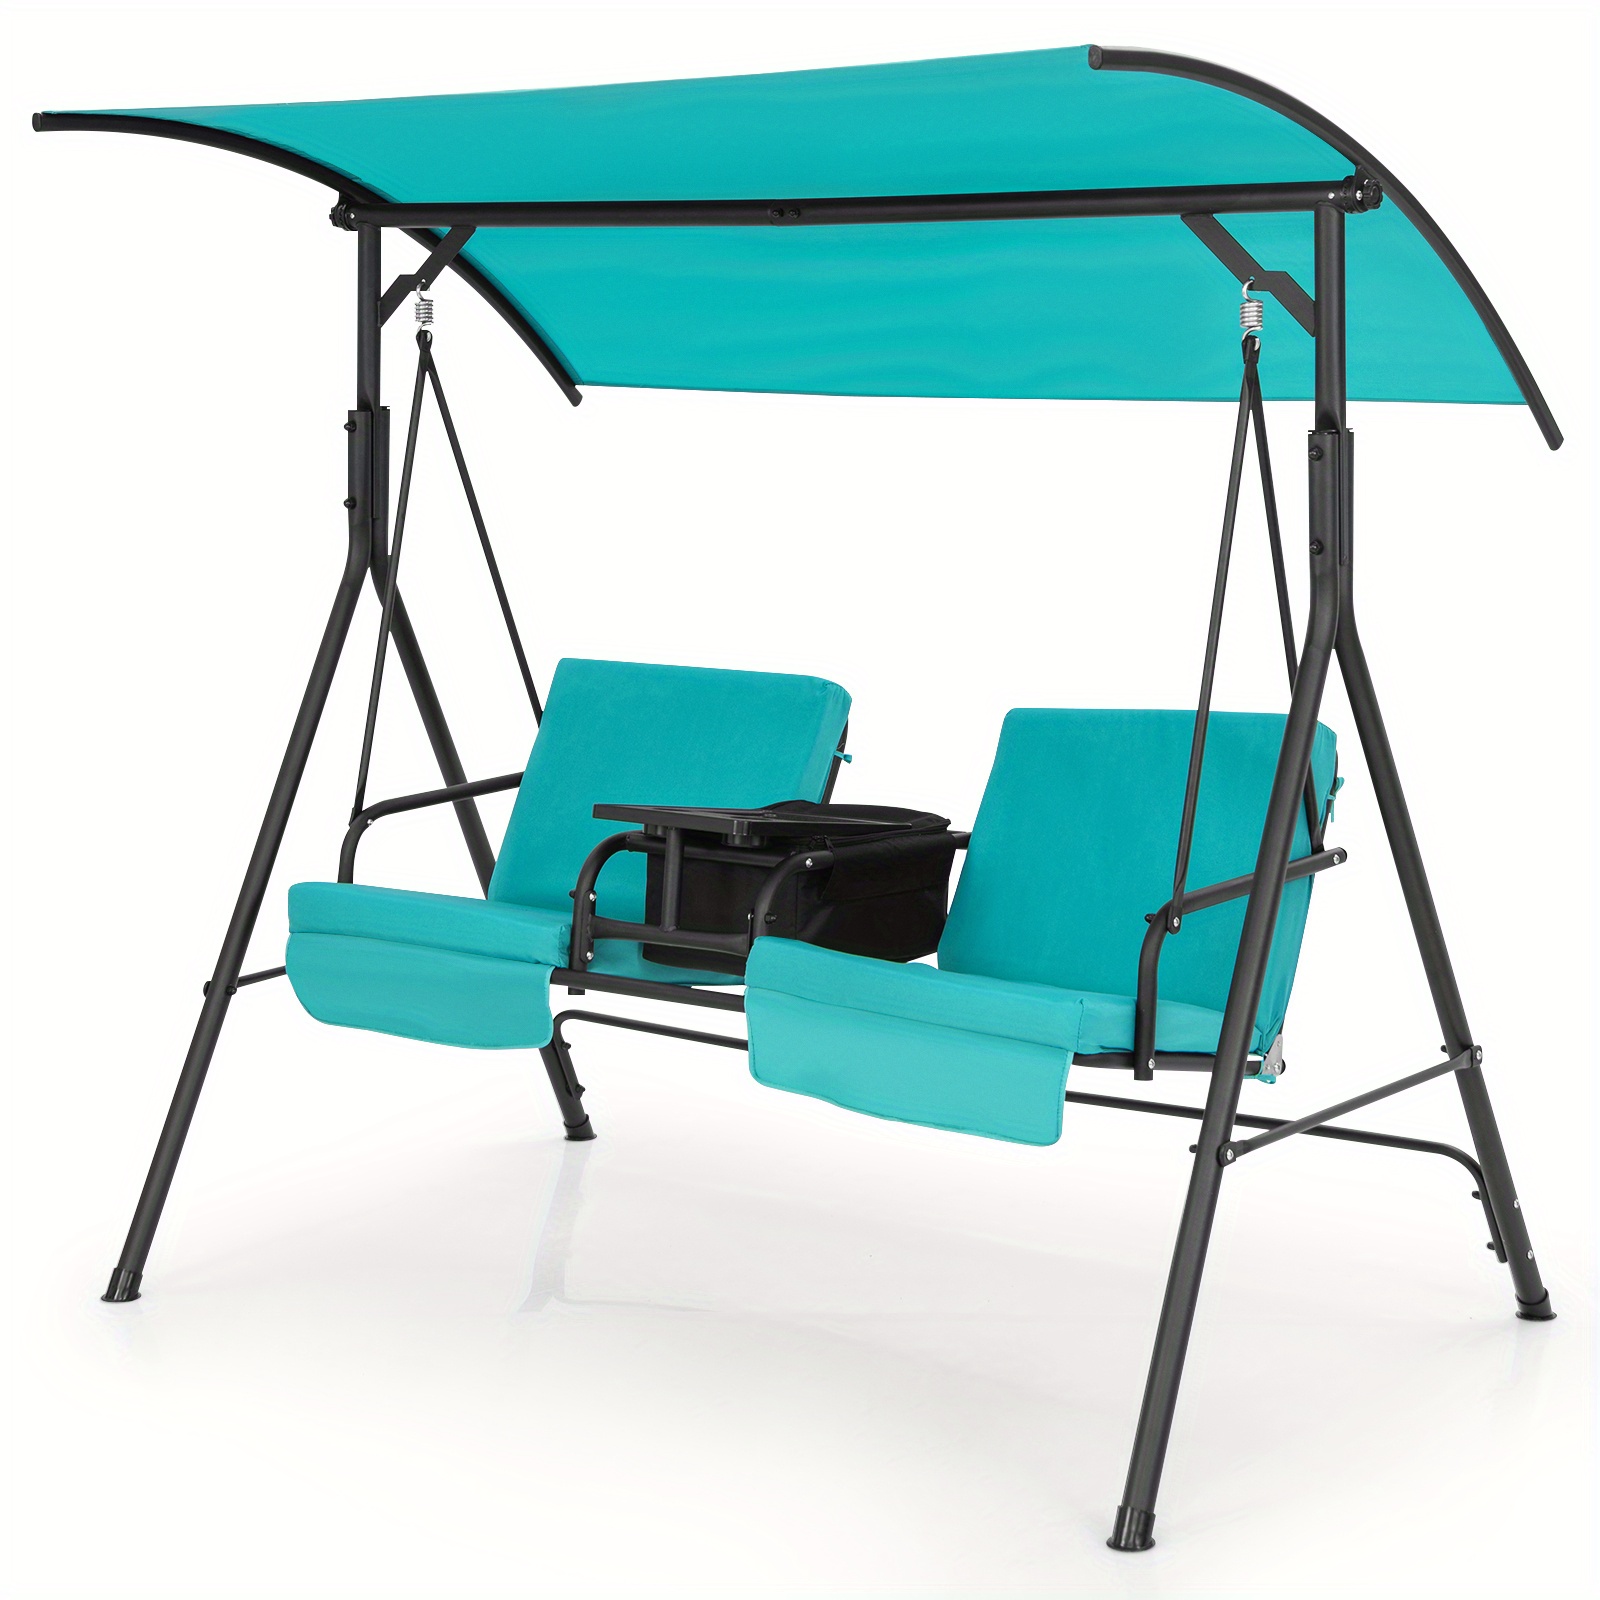 

Lifezeal 2-person Canopy Porch Swing Padded Chair Cooler Bag Rotatable Tray Turquoise